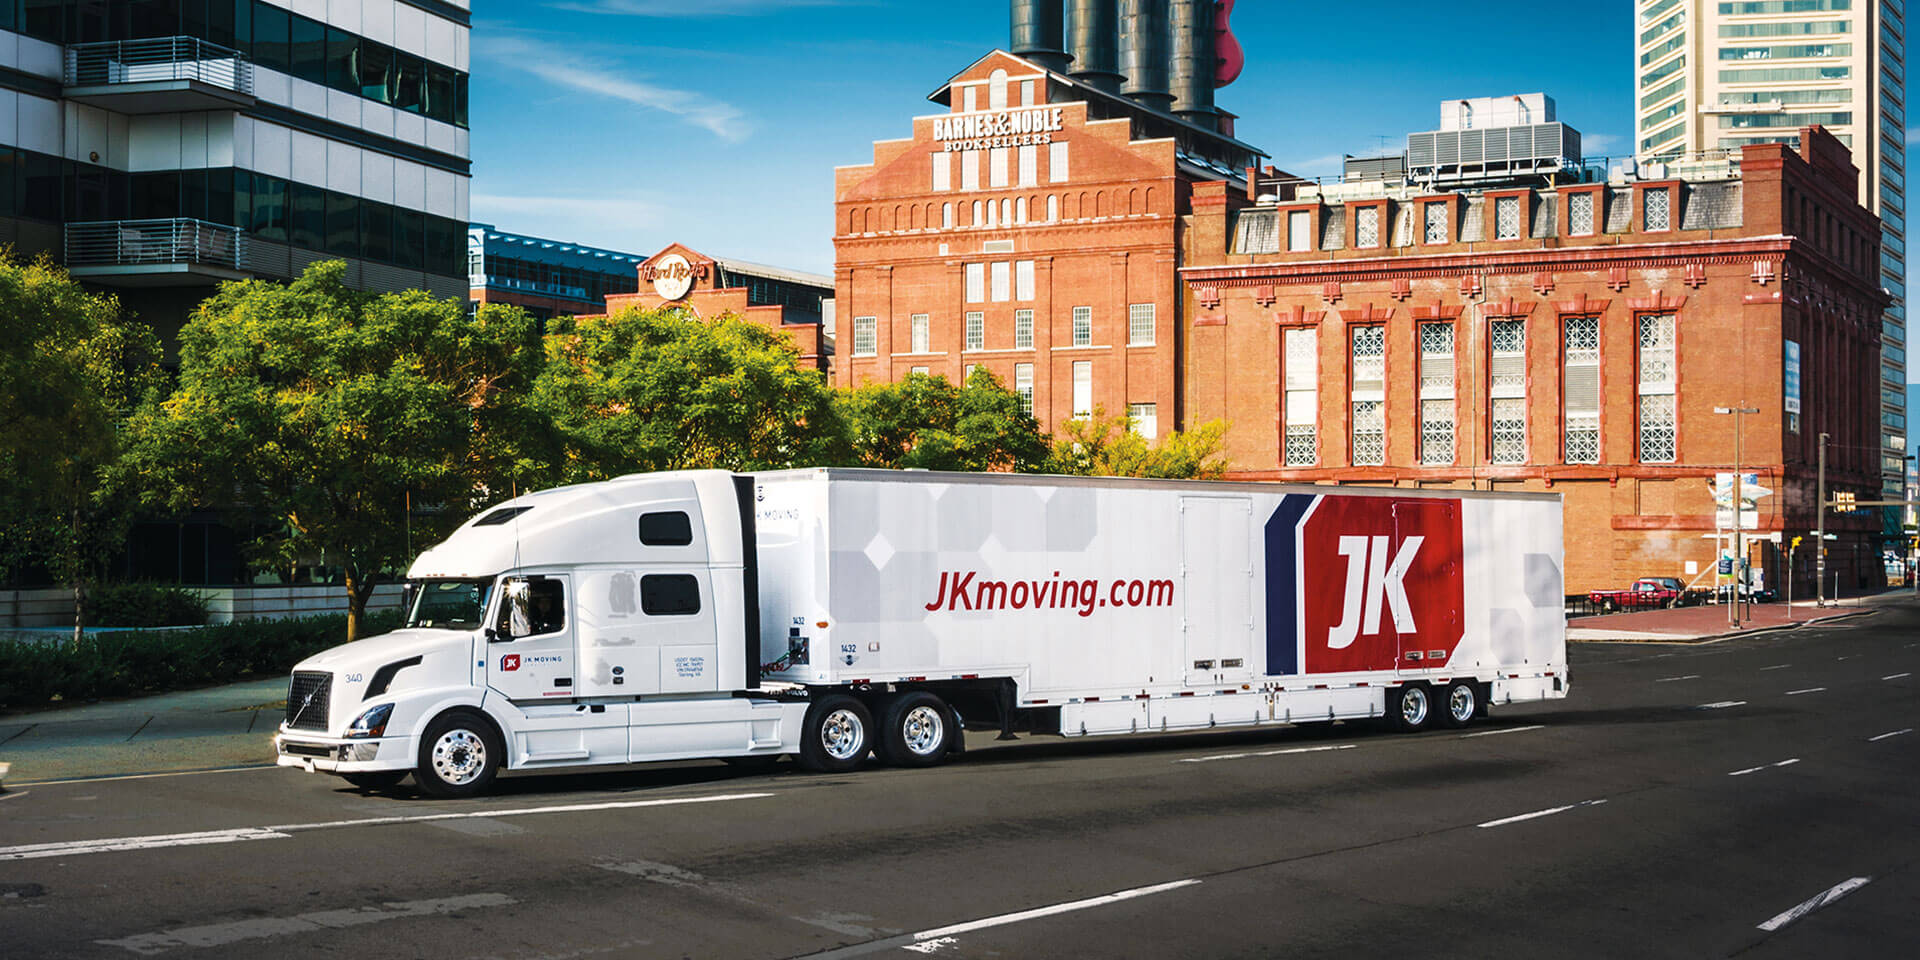 With help from brand strategists at Grafik, the unified designs of the JK trucks are a smart brand decision.